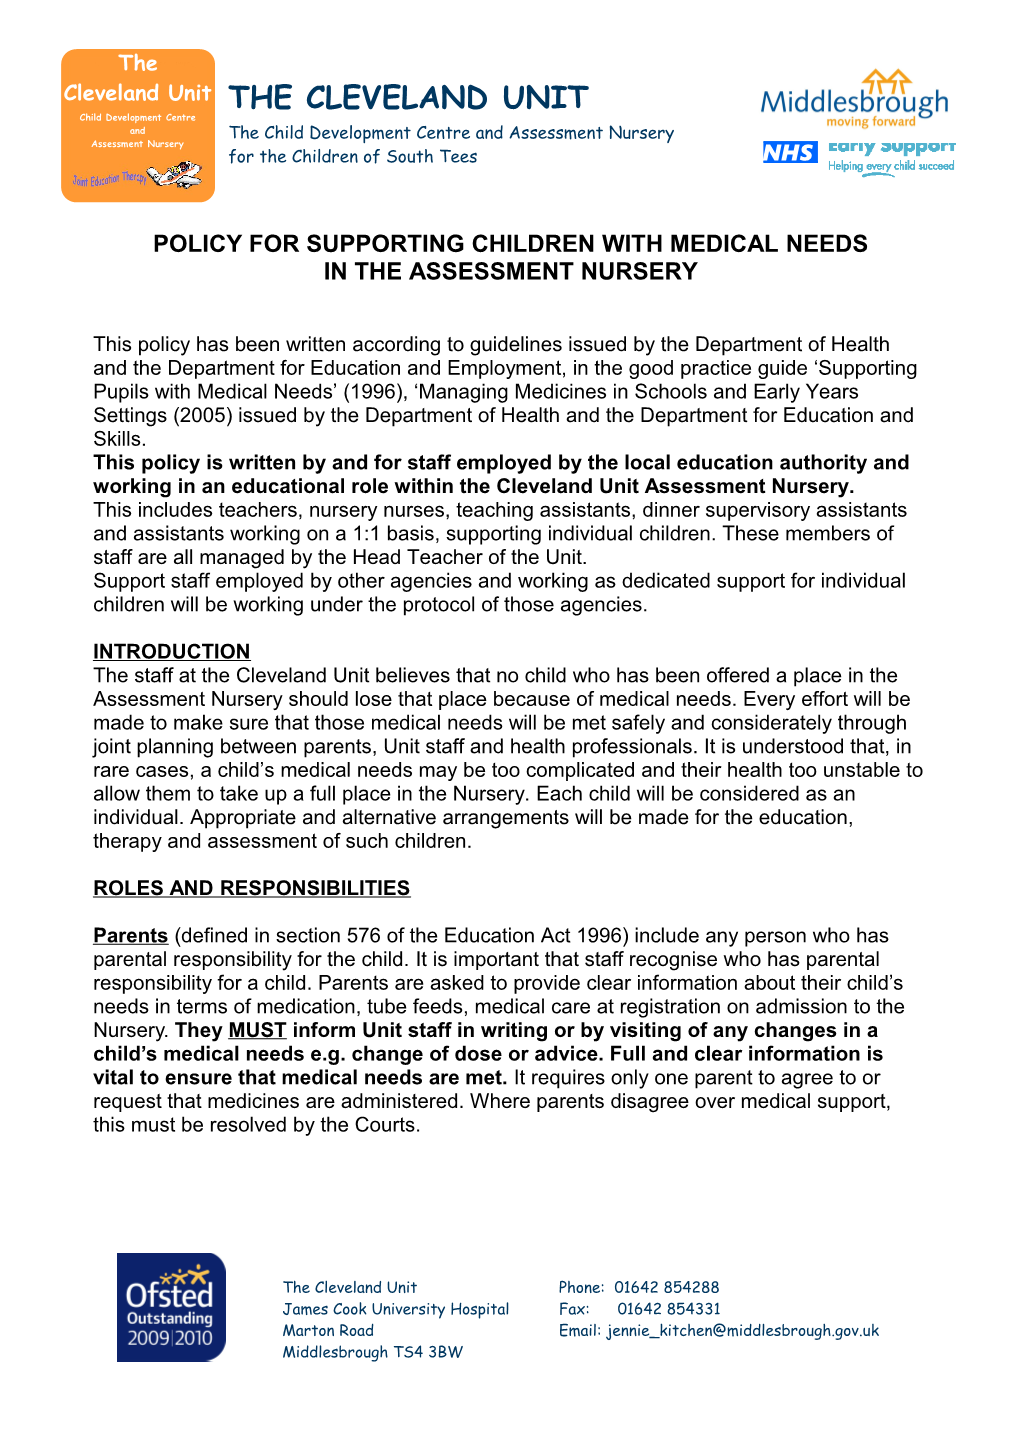 Policy for Supporting Children with Medical Needs